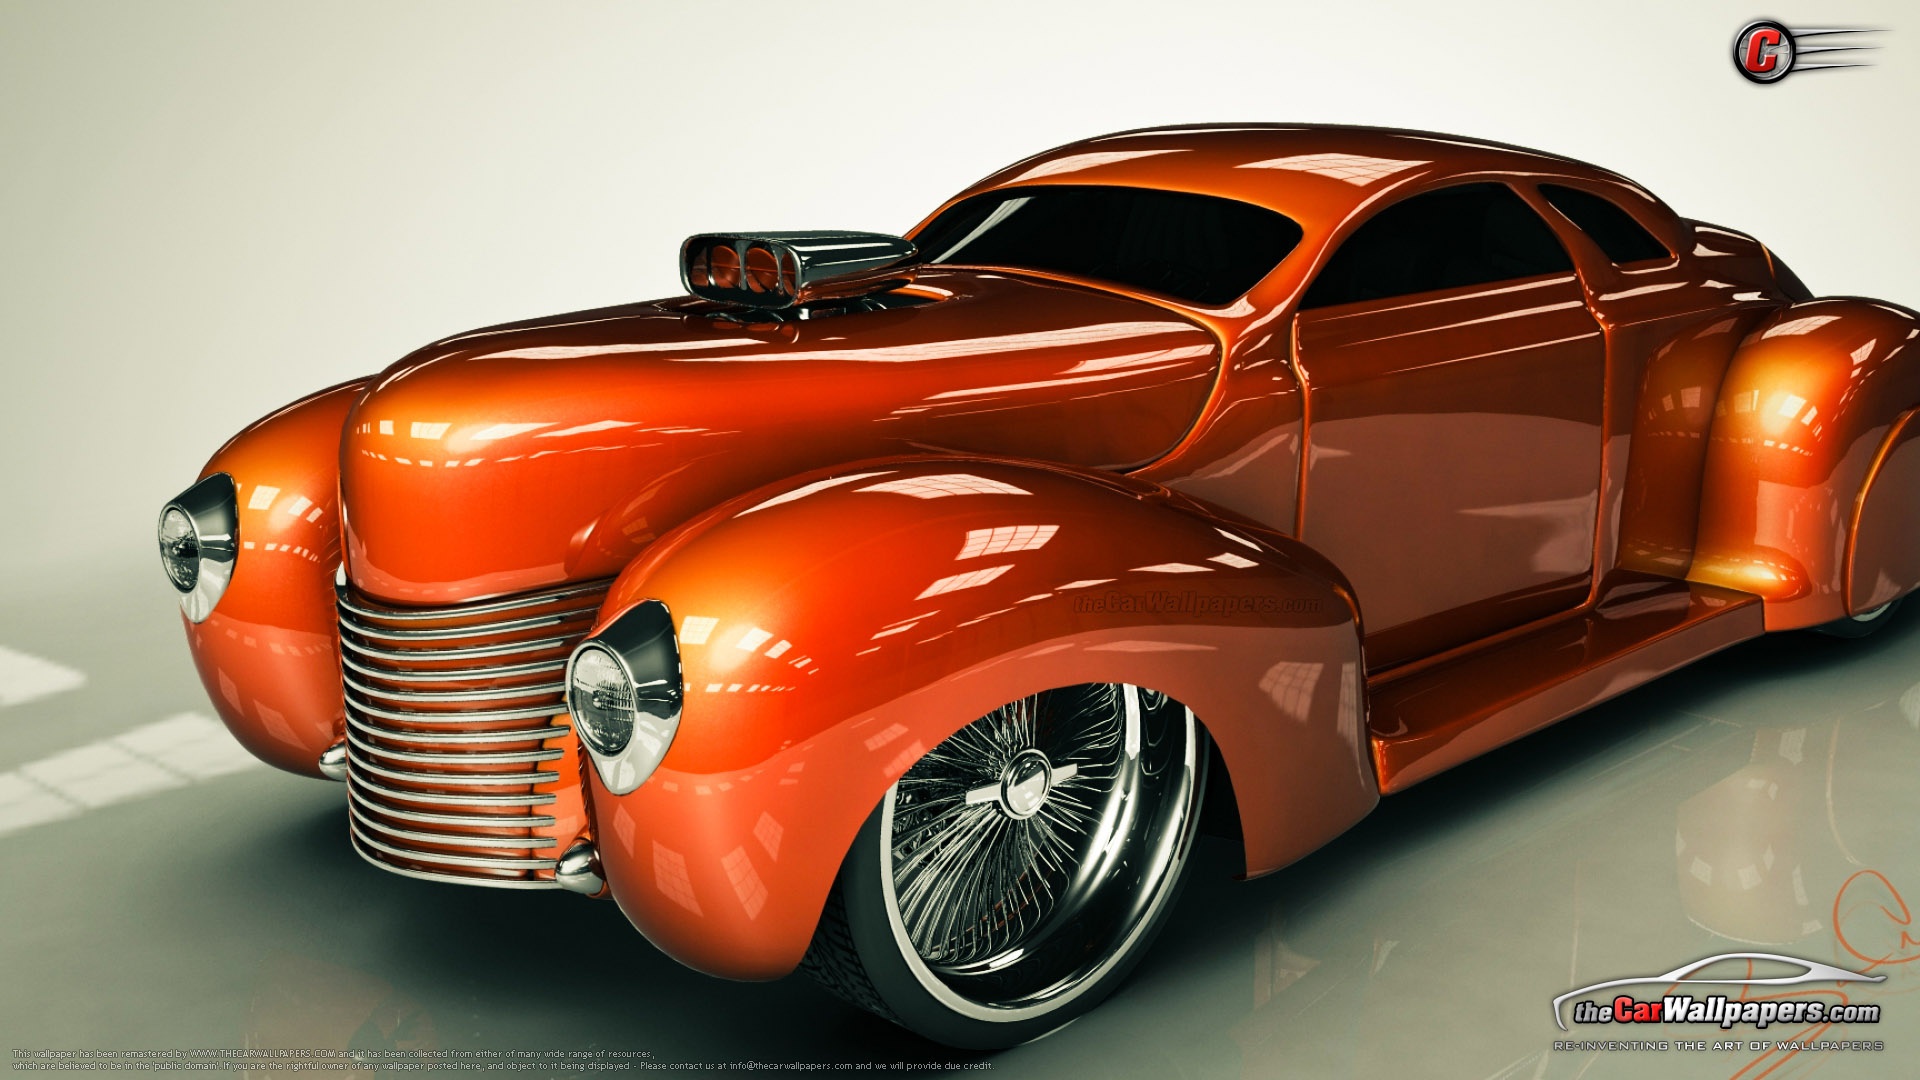 HD Cars Wallpaper With Girls Trucks Hot Rod Pictures